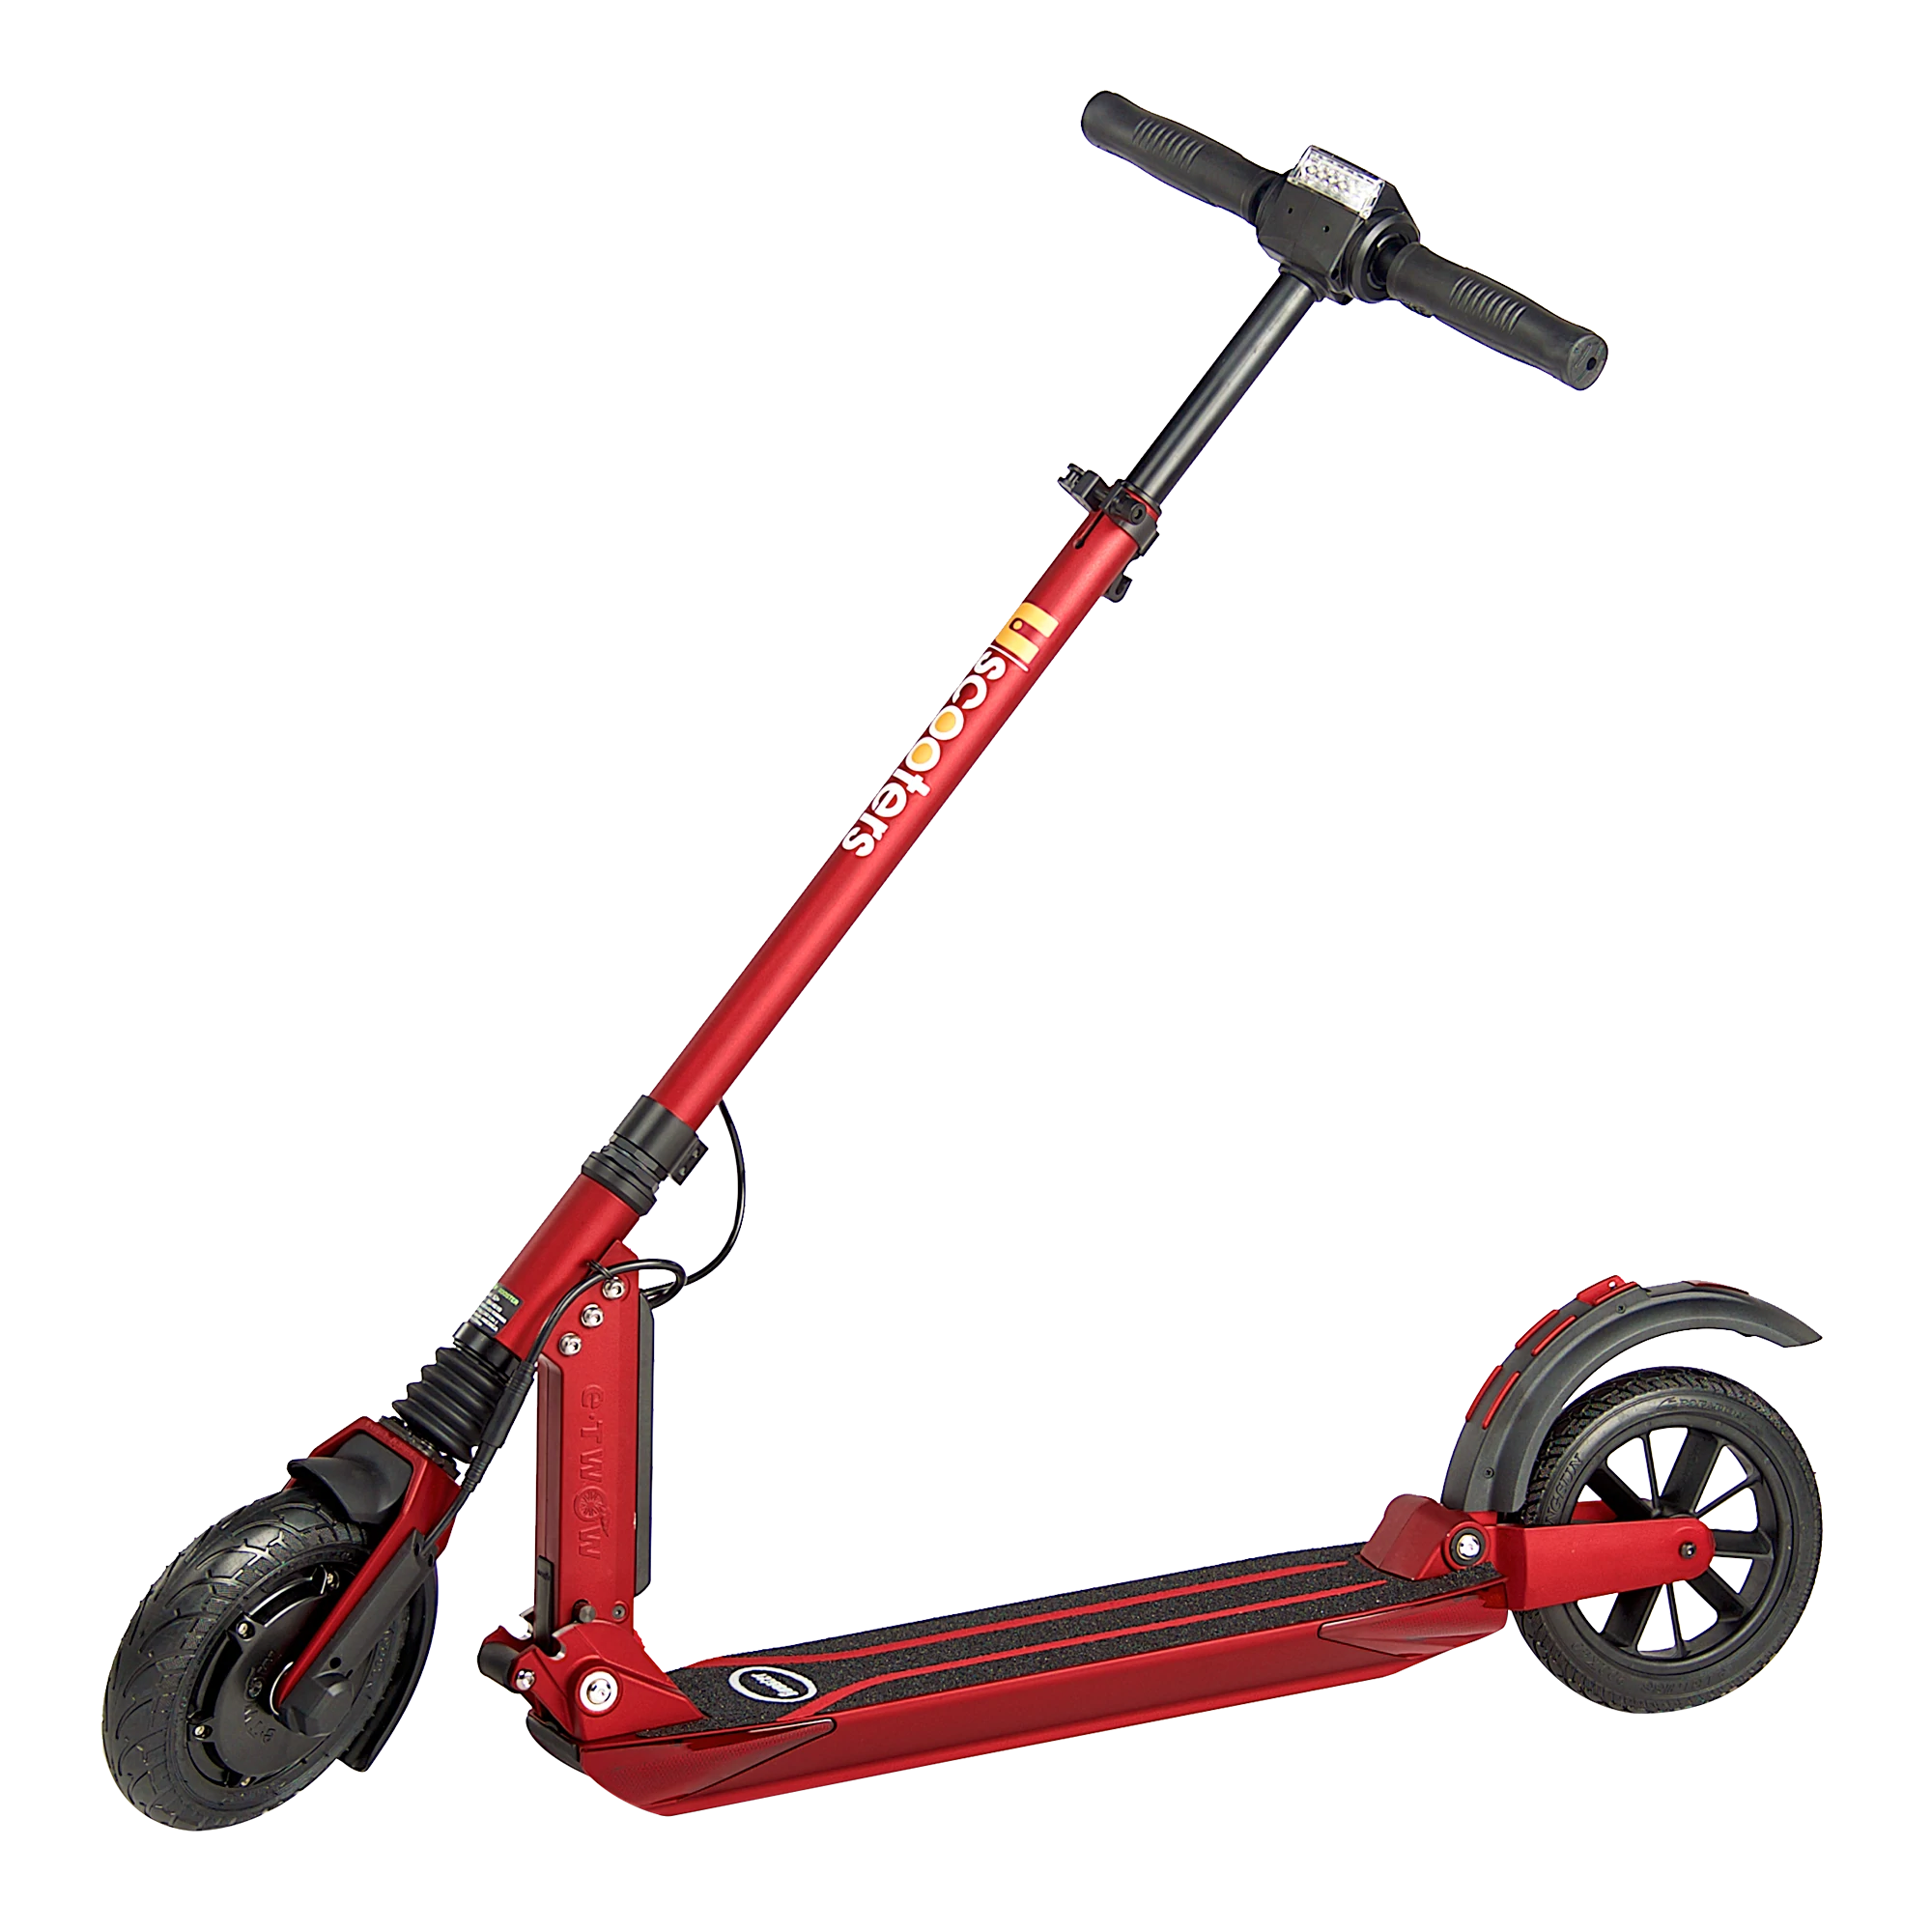 Booster | Buy Electric Scooter and | Electric Vehicle Transportation - E-TWOW - Premium Electric Scooters